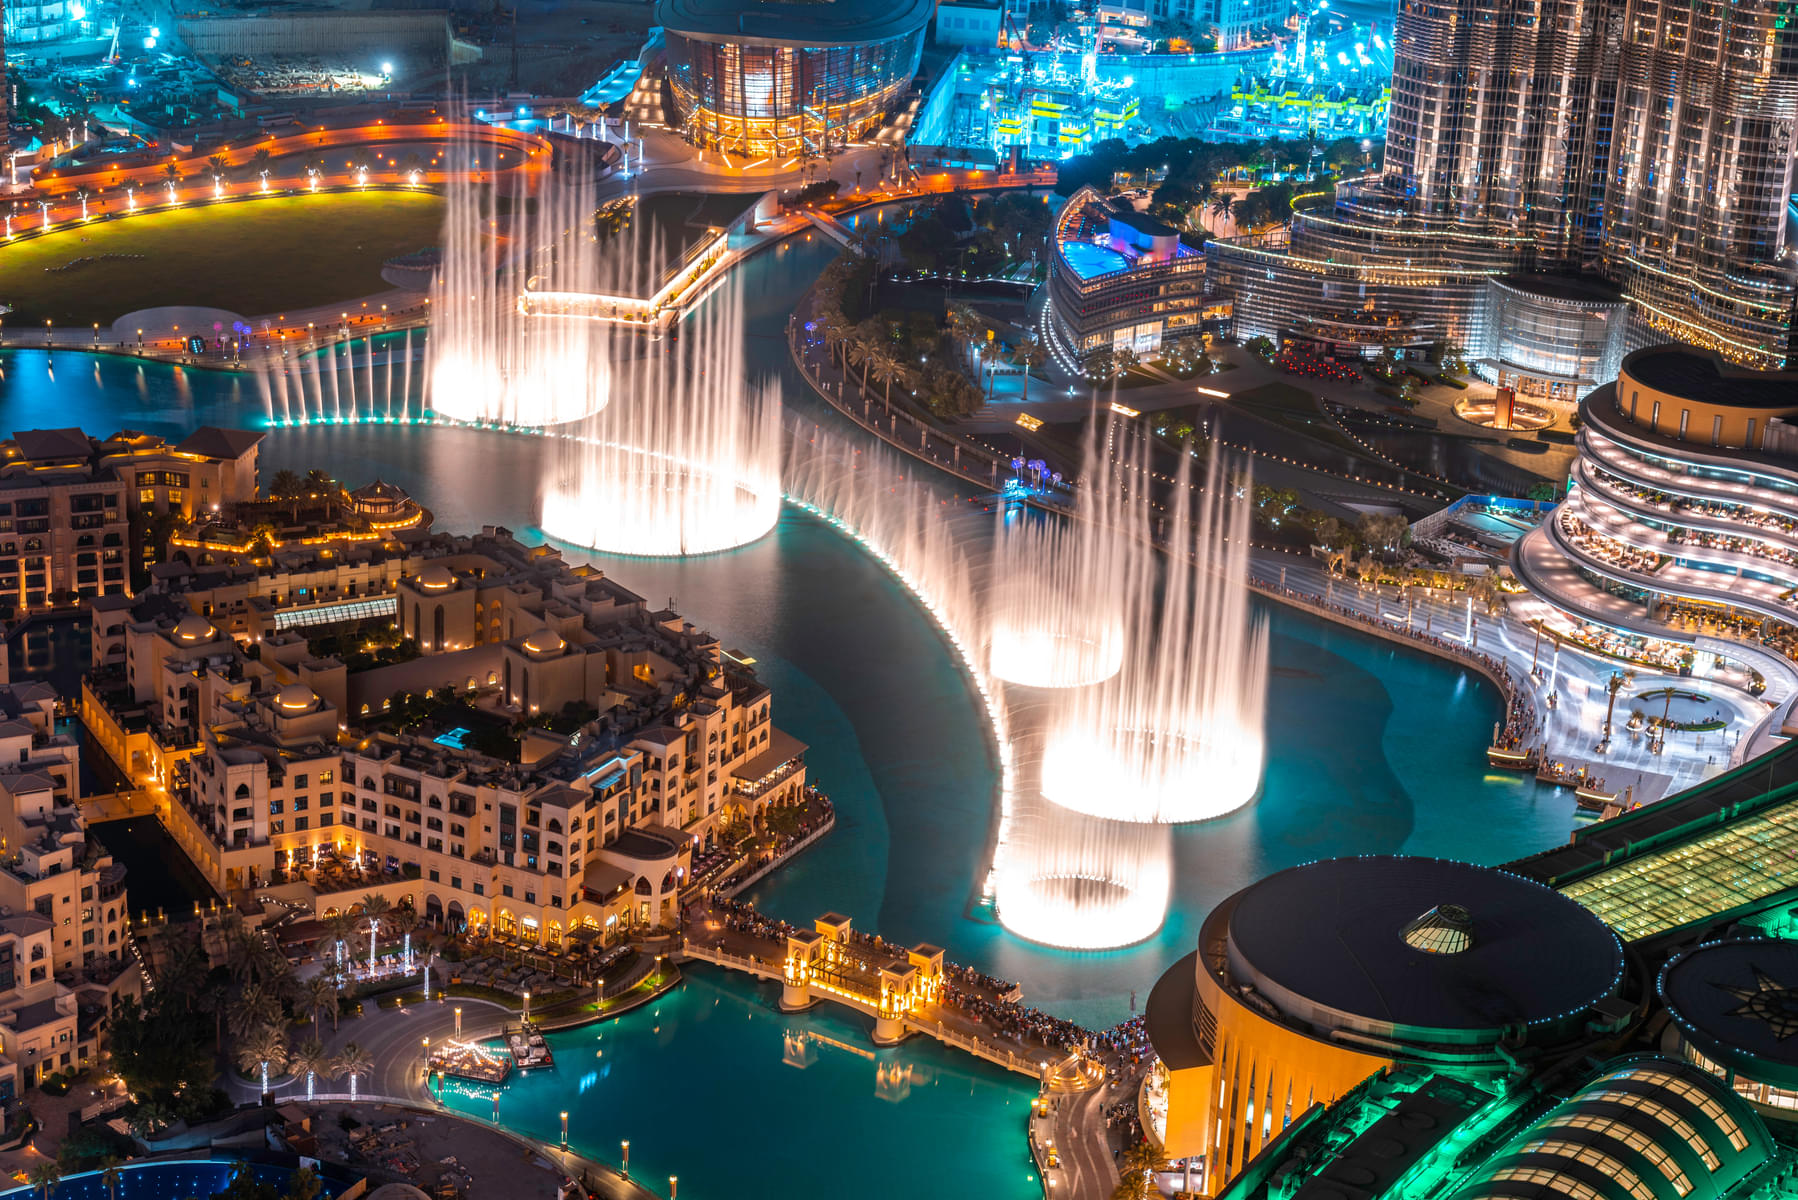 Marvel at the captivating aerial view of the renowned Dubai Fountain.